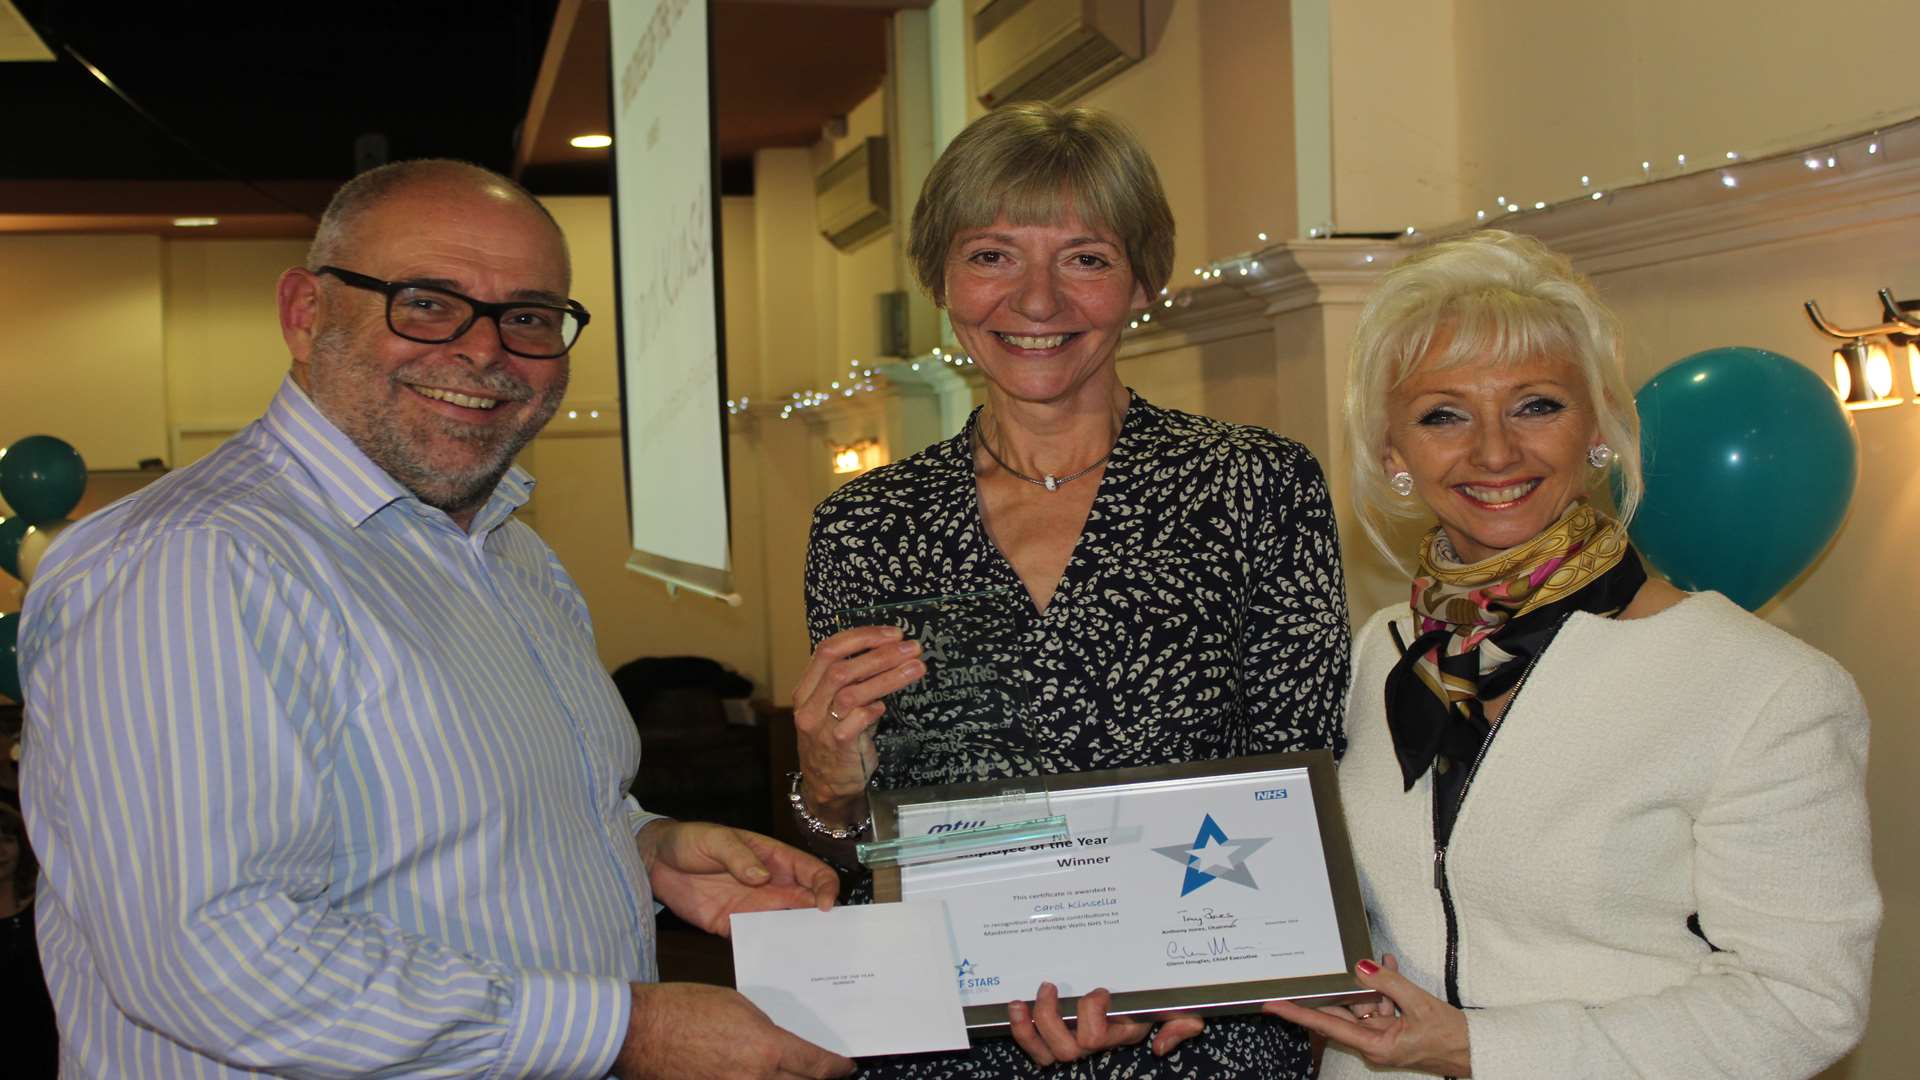 Carol Kinsella, employee of the year, receives her award from Glenn Douglas and Debbie McGee.